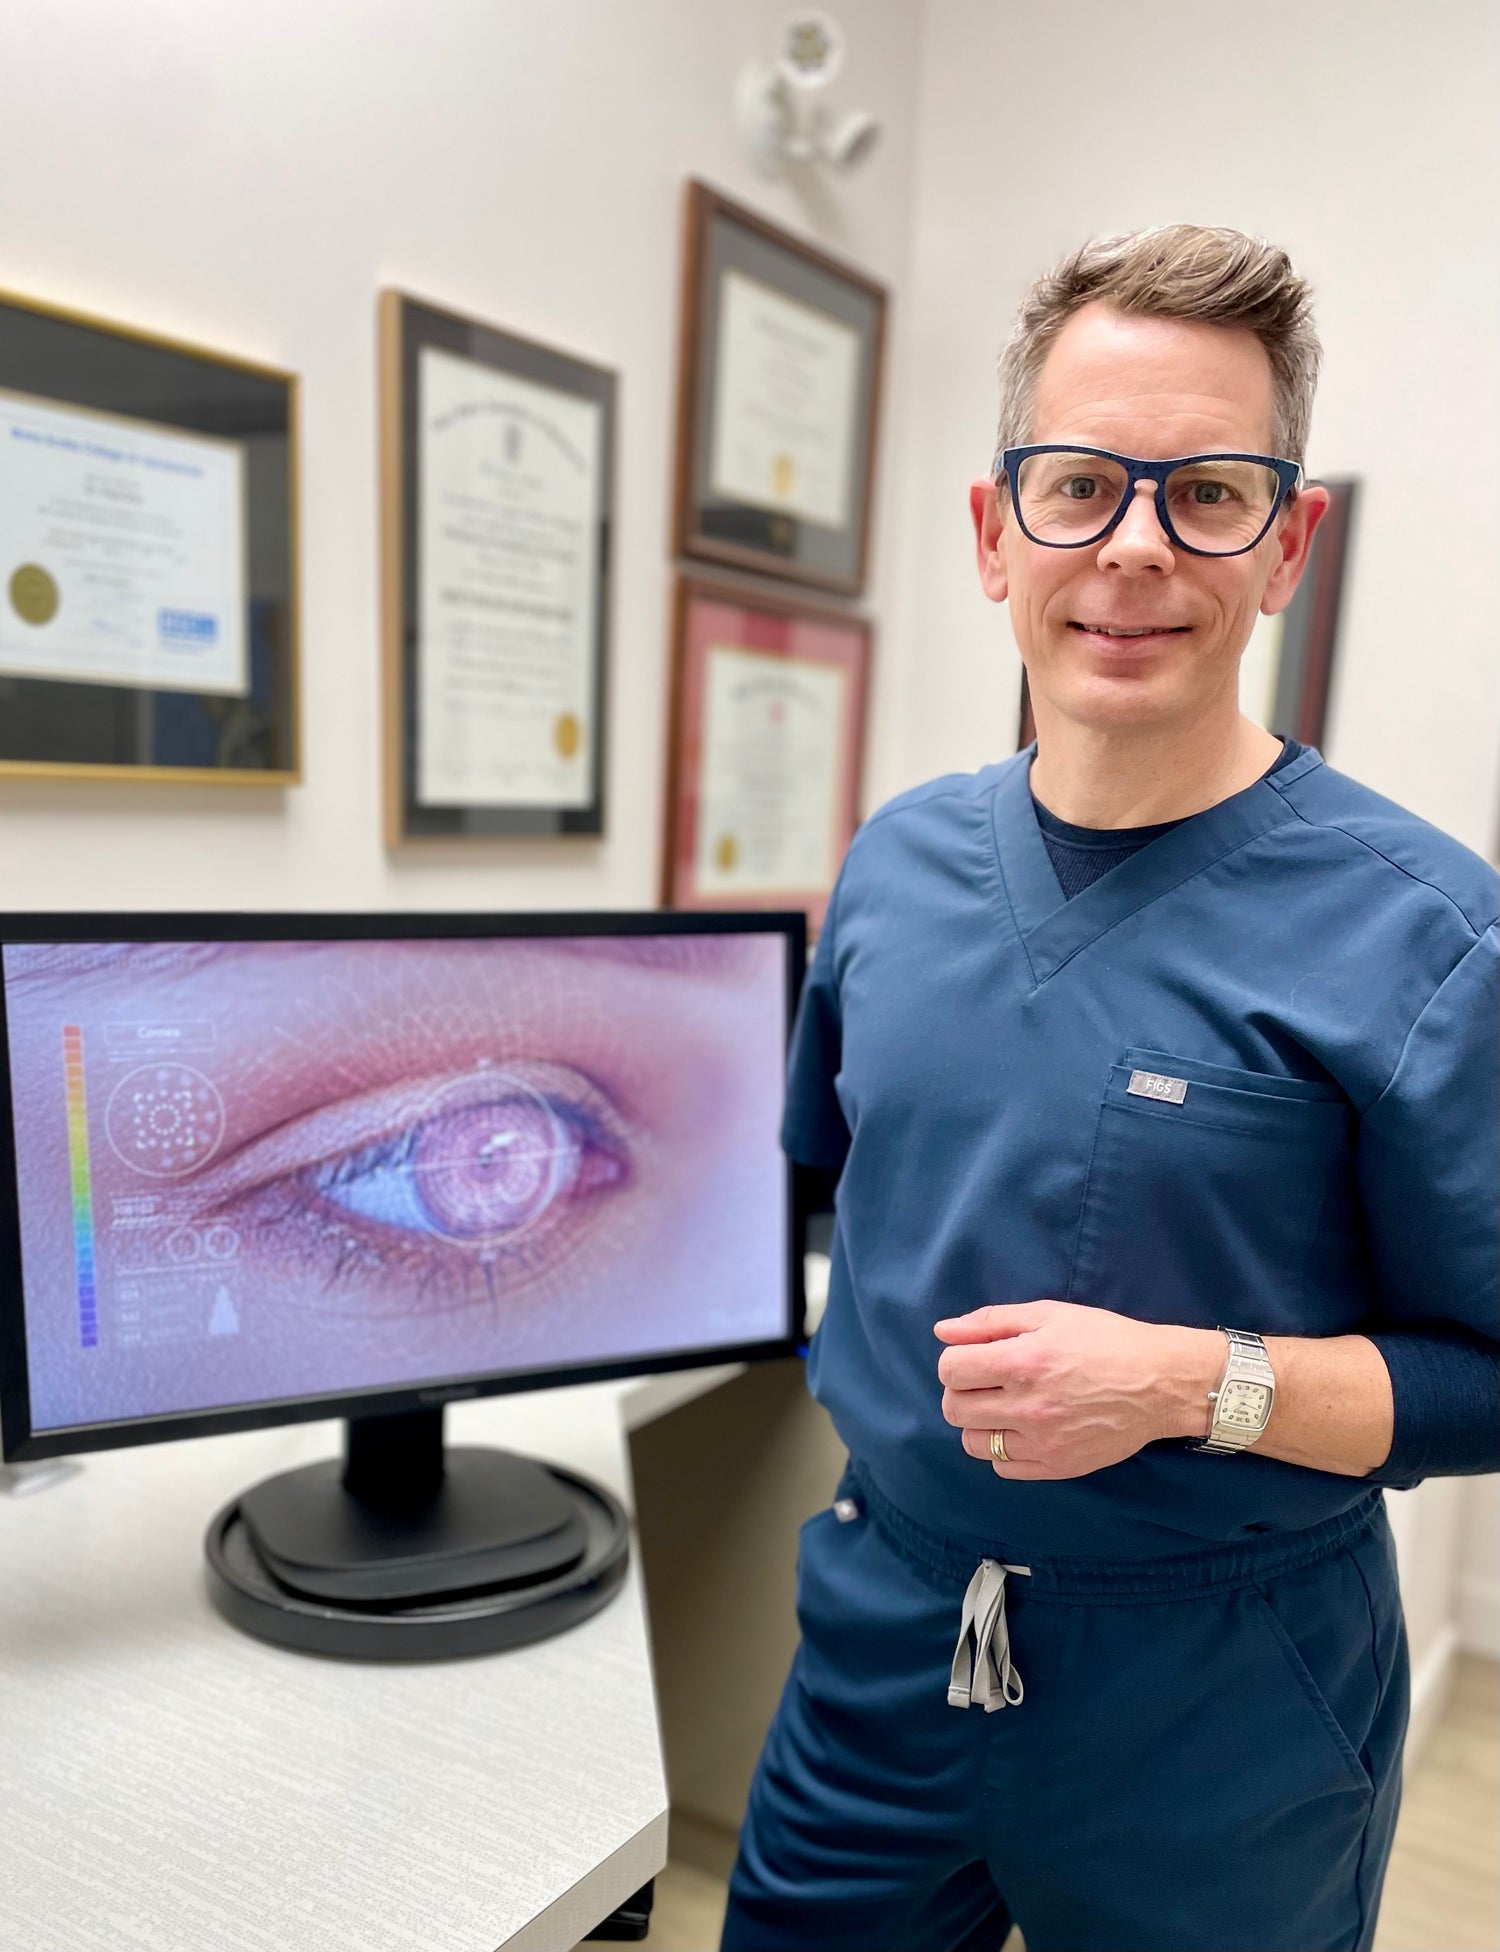 Smiling Dr Jeff Sansgter wearing scrubs, next to a computer screen with picture of an eye having laser surgery.